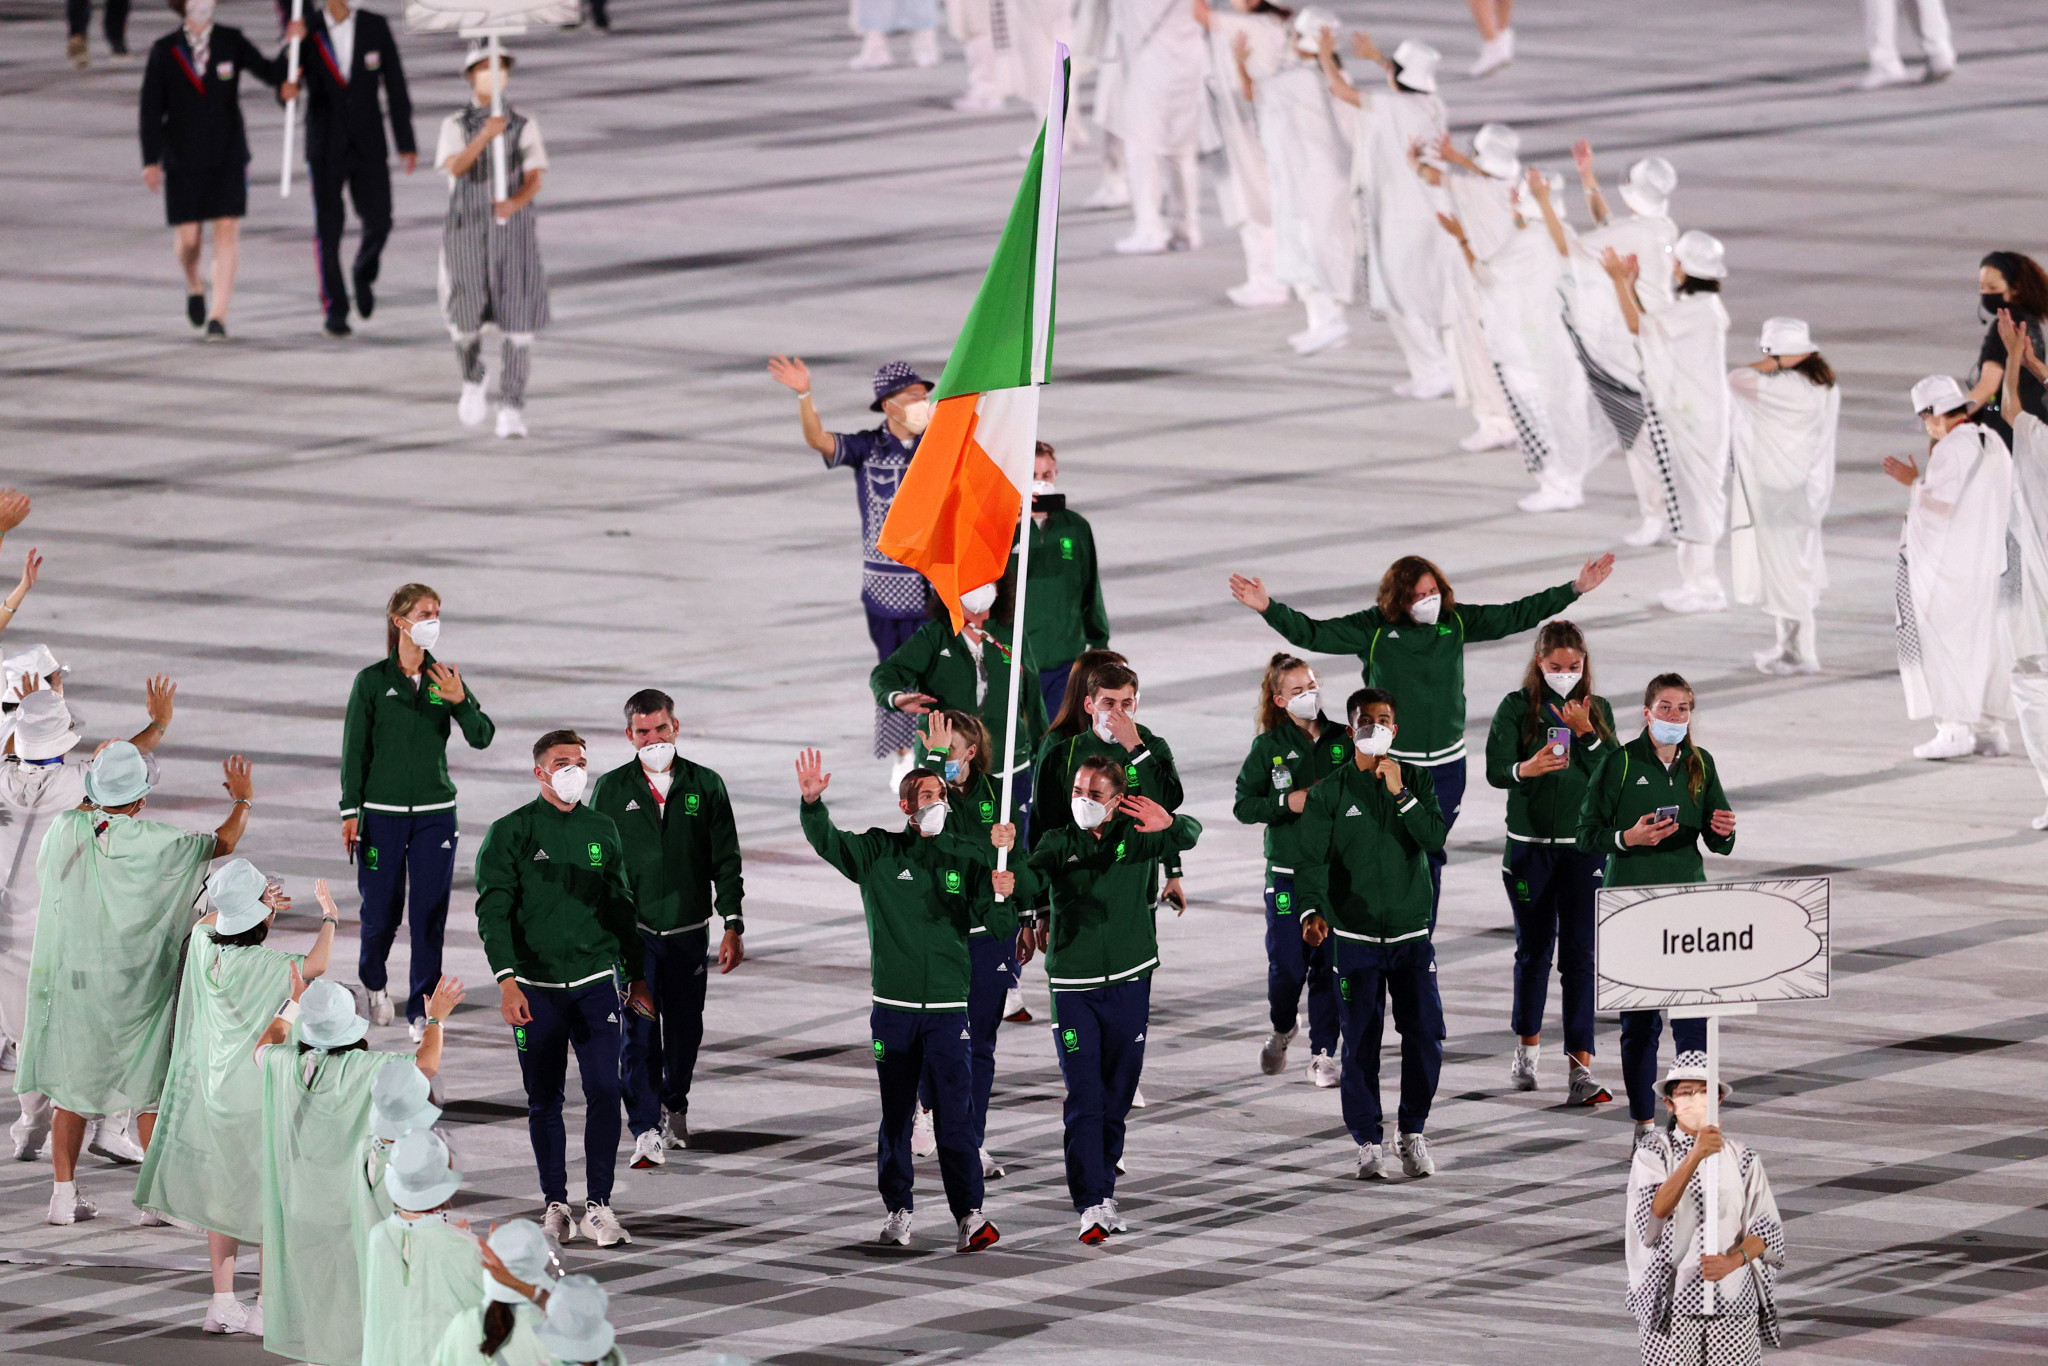 Team Ireland has opened applications for volunteers to join its team at the Paris 2024 Olympics ©Getty Images